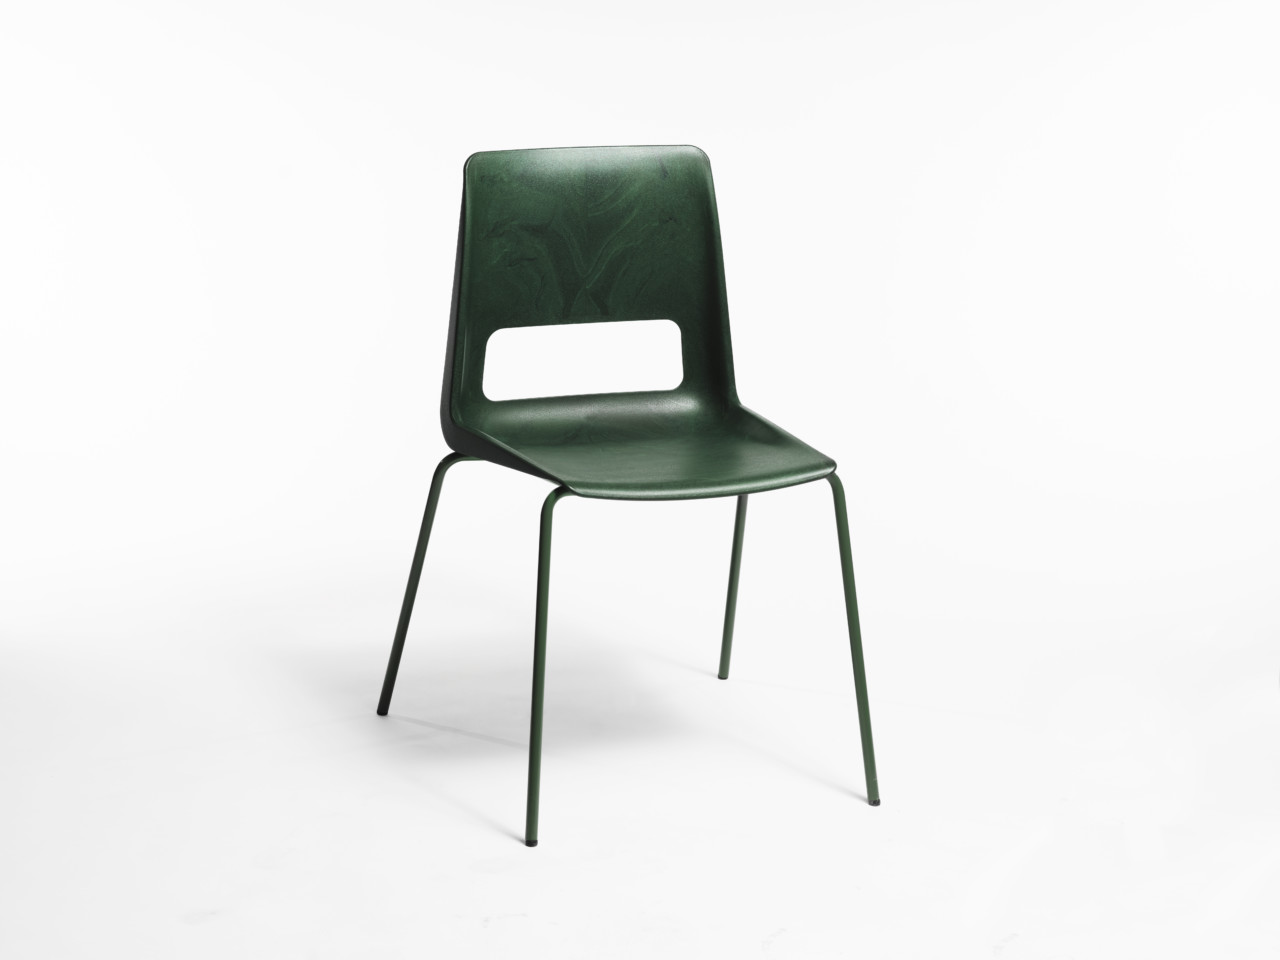 a green chair on a white background for waste futures